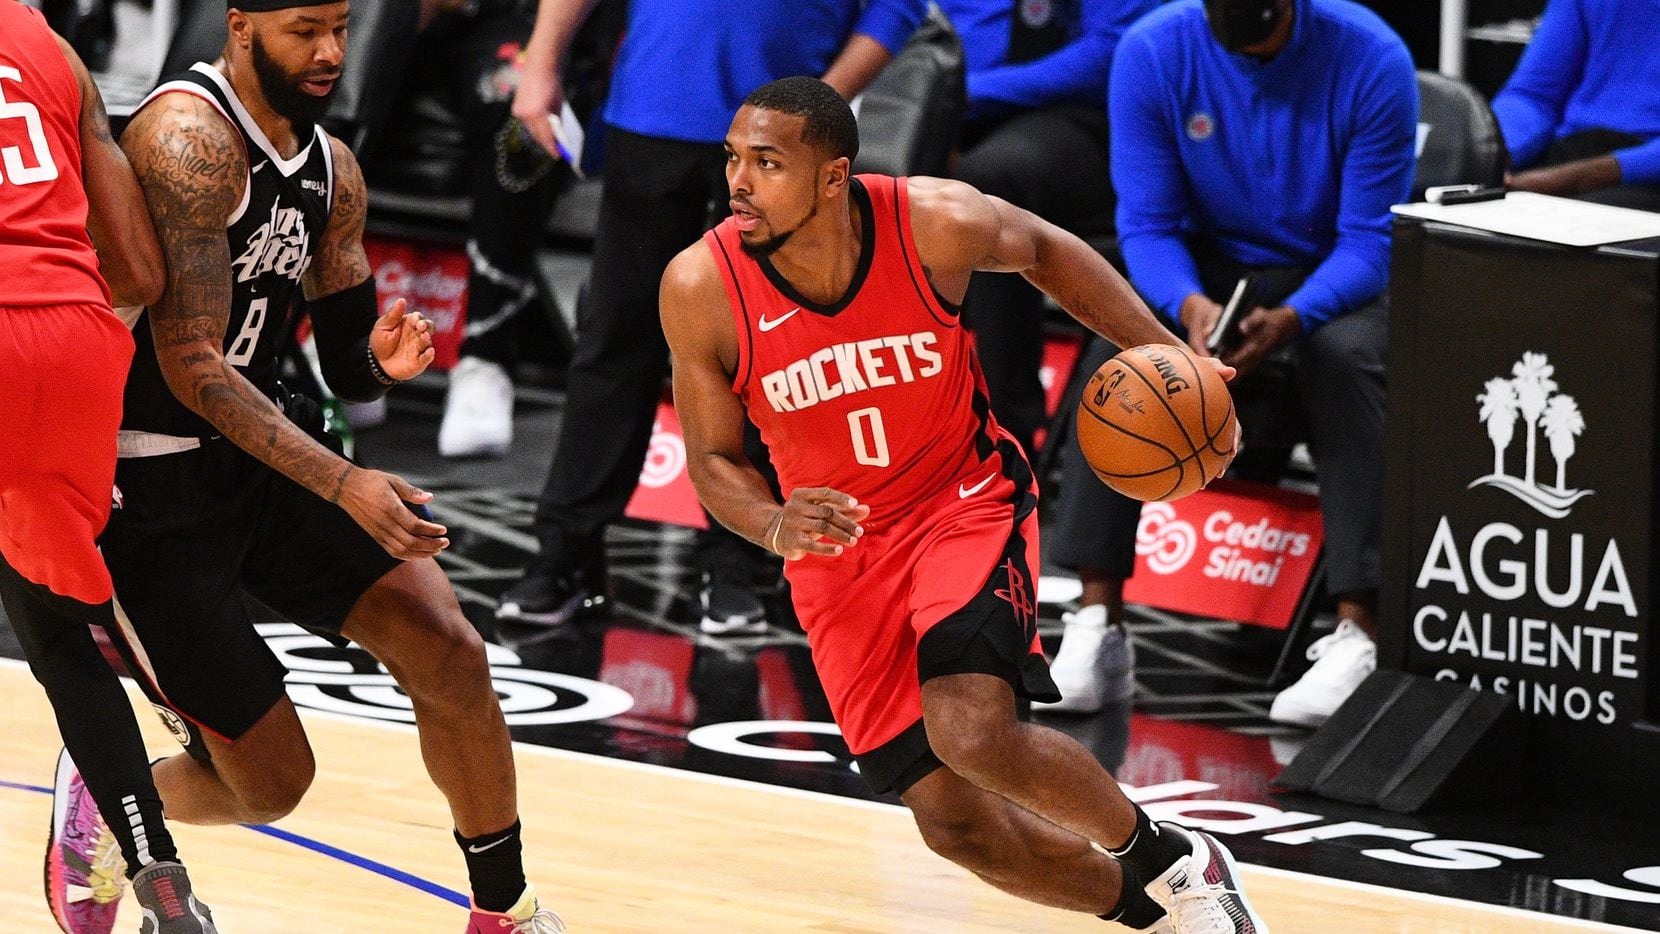 LOS ANGELES, CA - APRIL 09: Houston Rockets Guard Sterling Brown (0) drives to the basket during a NBA game between the Houston Rockets and the Los Angeles Clippers on April 9, 2021 at STAPLES Center in Los Angeles, CA.